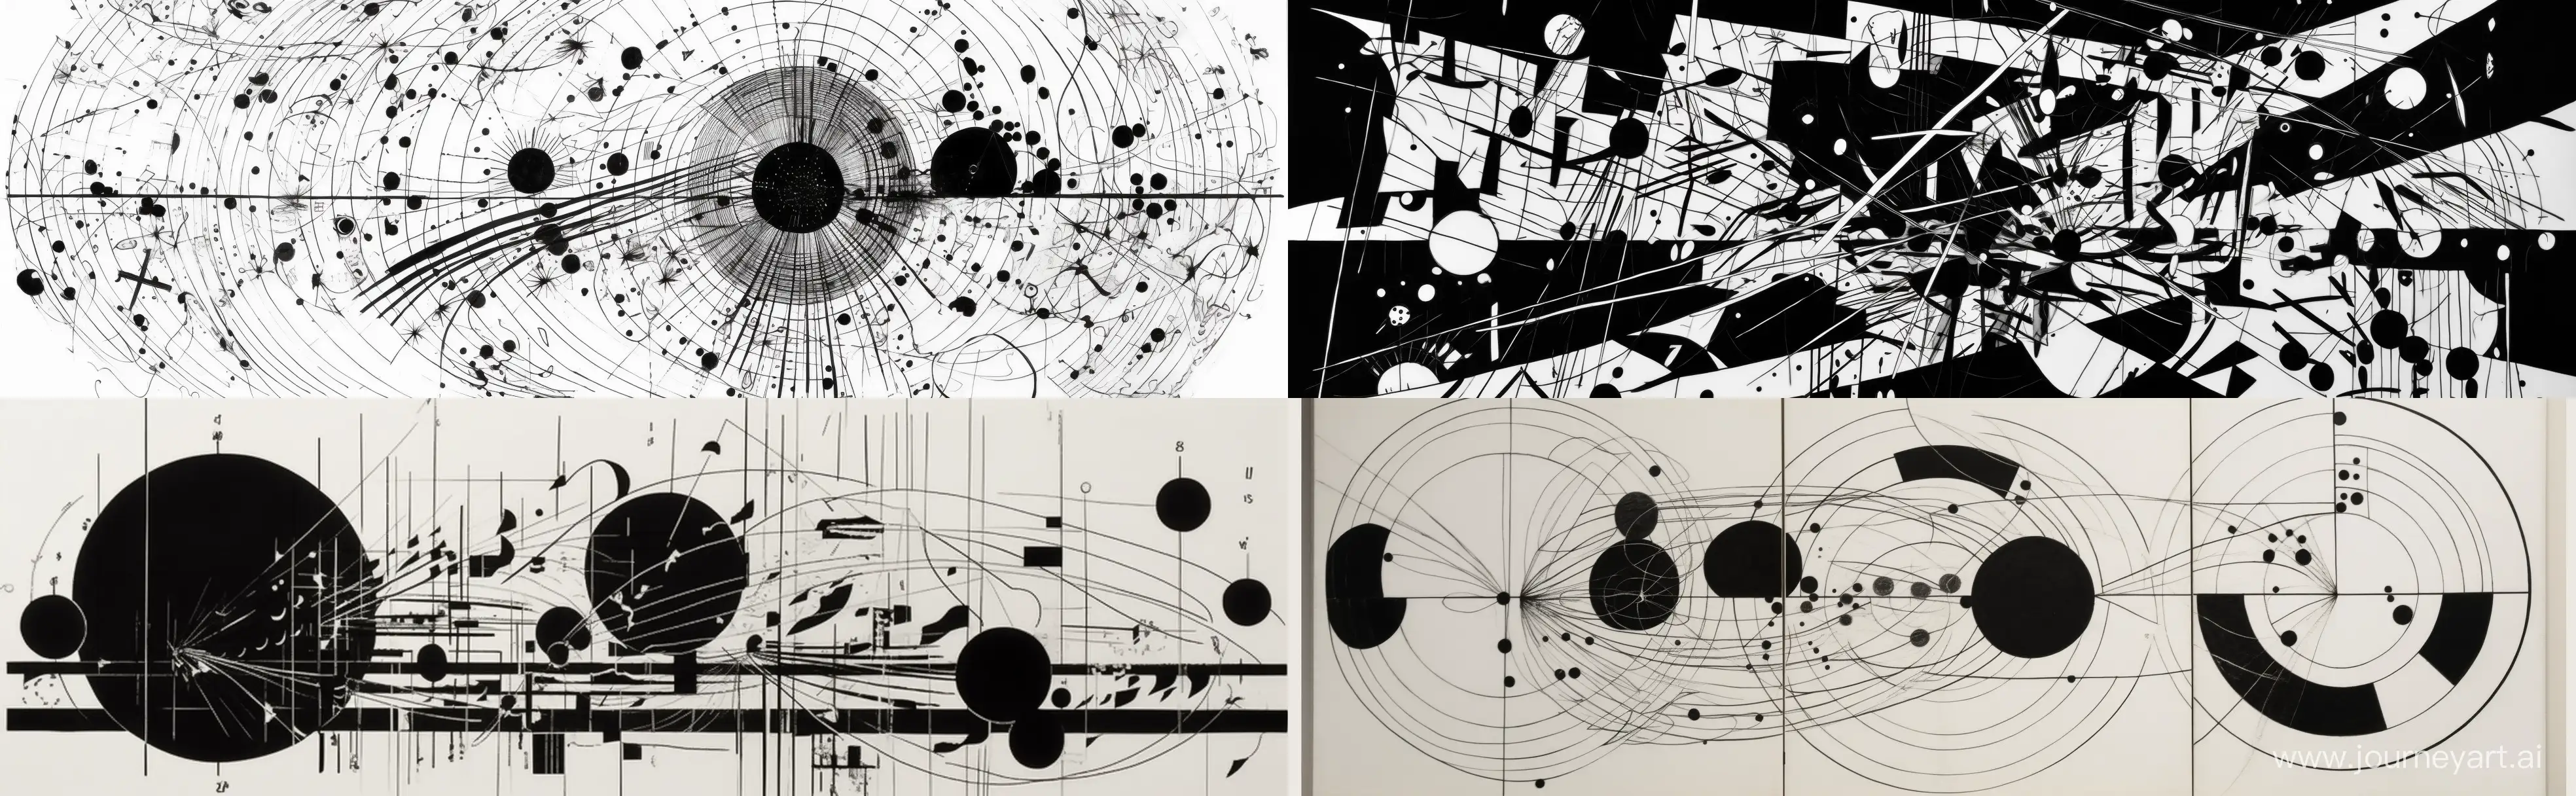 graphic score drawing in black and white, in the style of Cornelius Cardew, minimal music rhythmic compositions, white paper --ar 256:79 --v 5 --s 500
